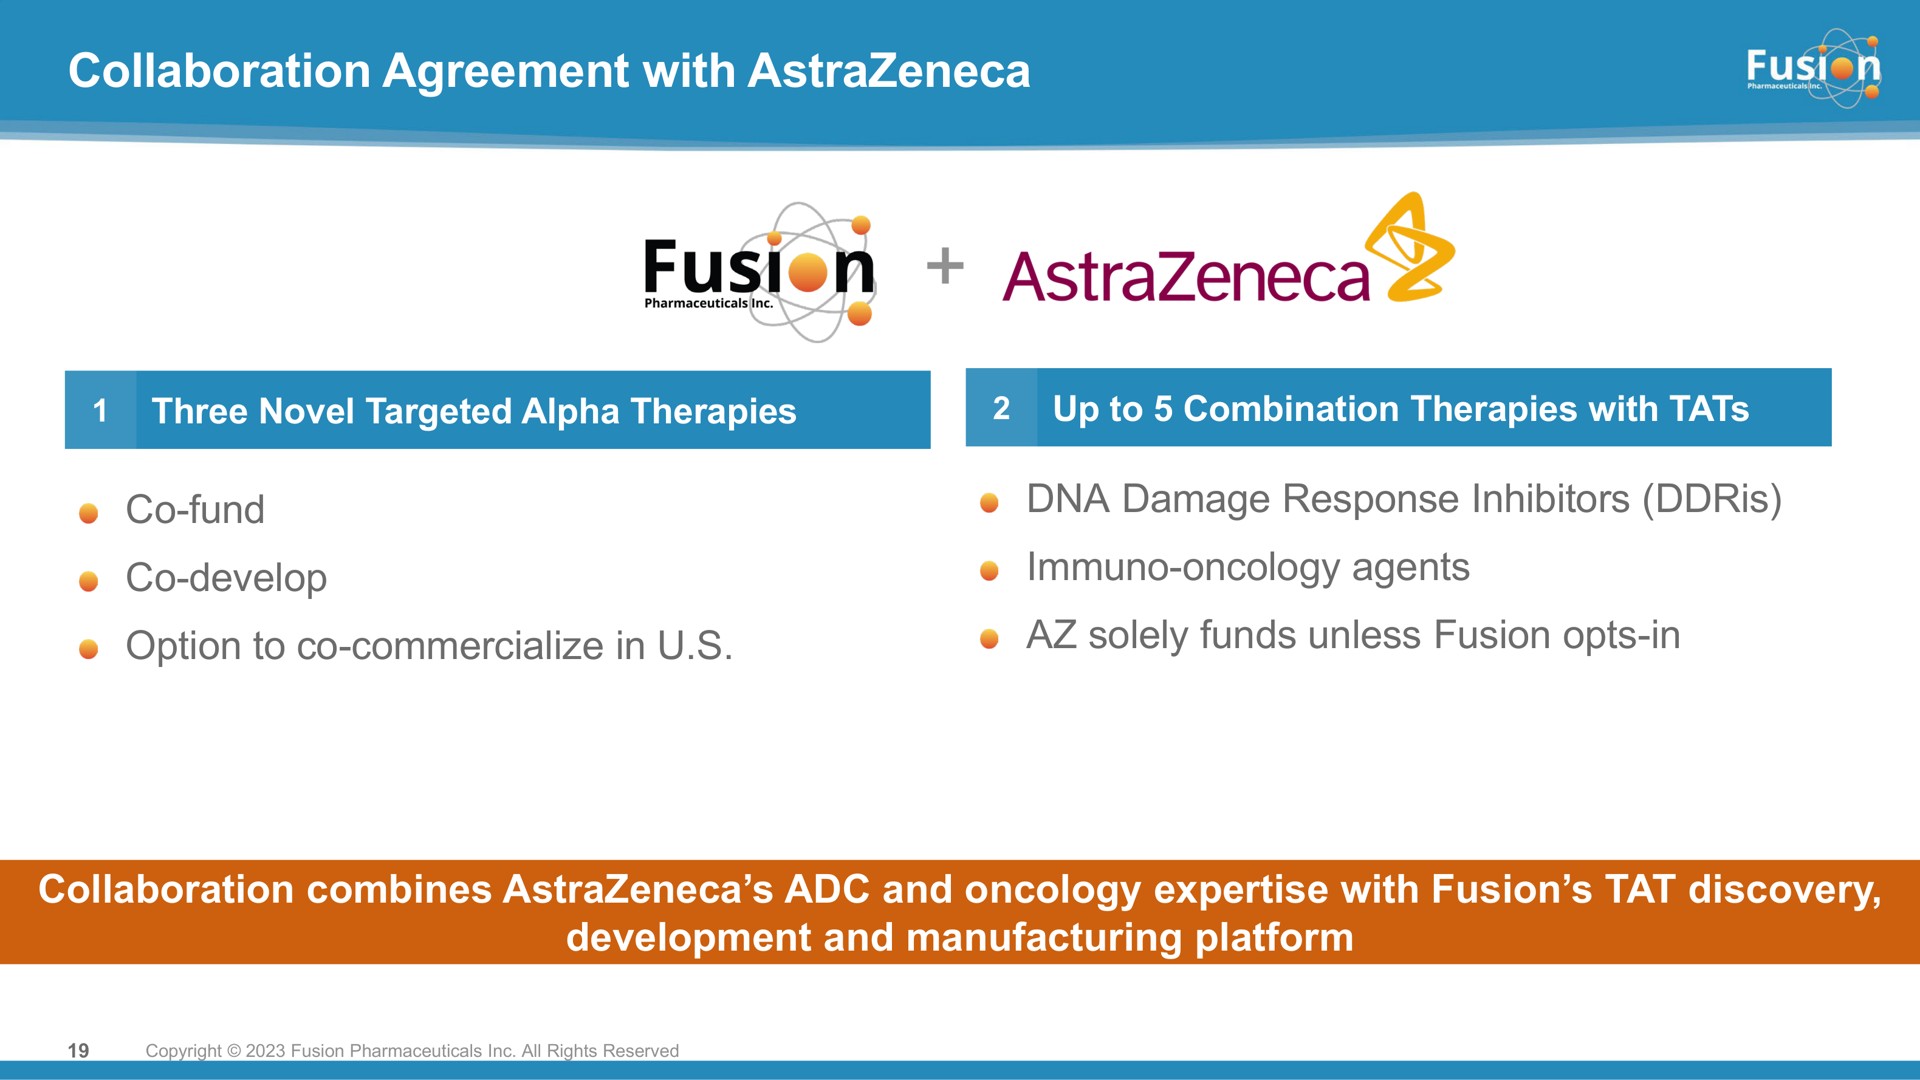 collaboration agreement with option to commercialize in solely funds unless fusion opts in | Fusion Pharmaceuticals